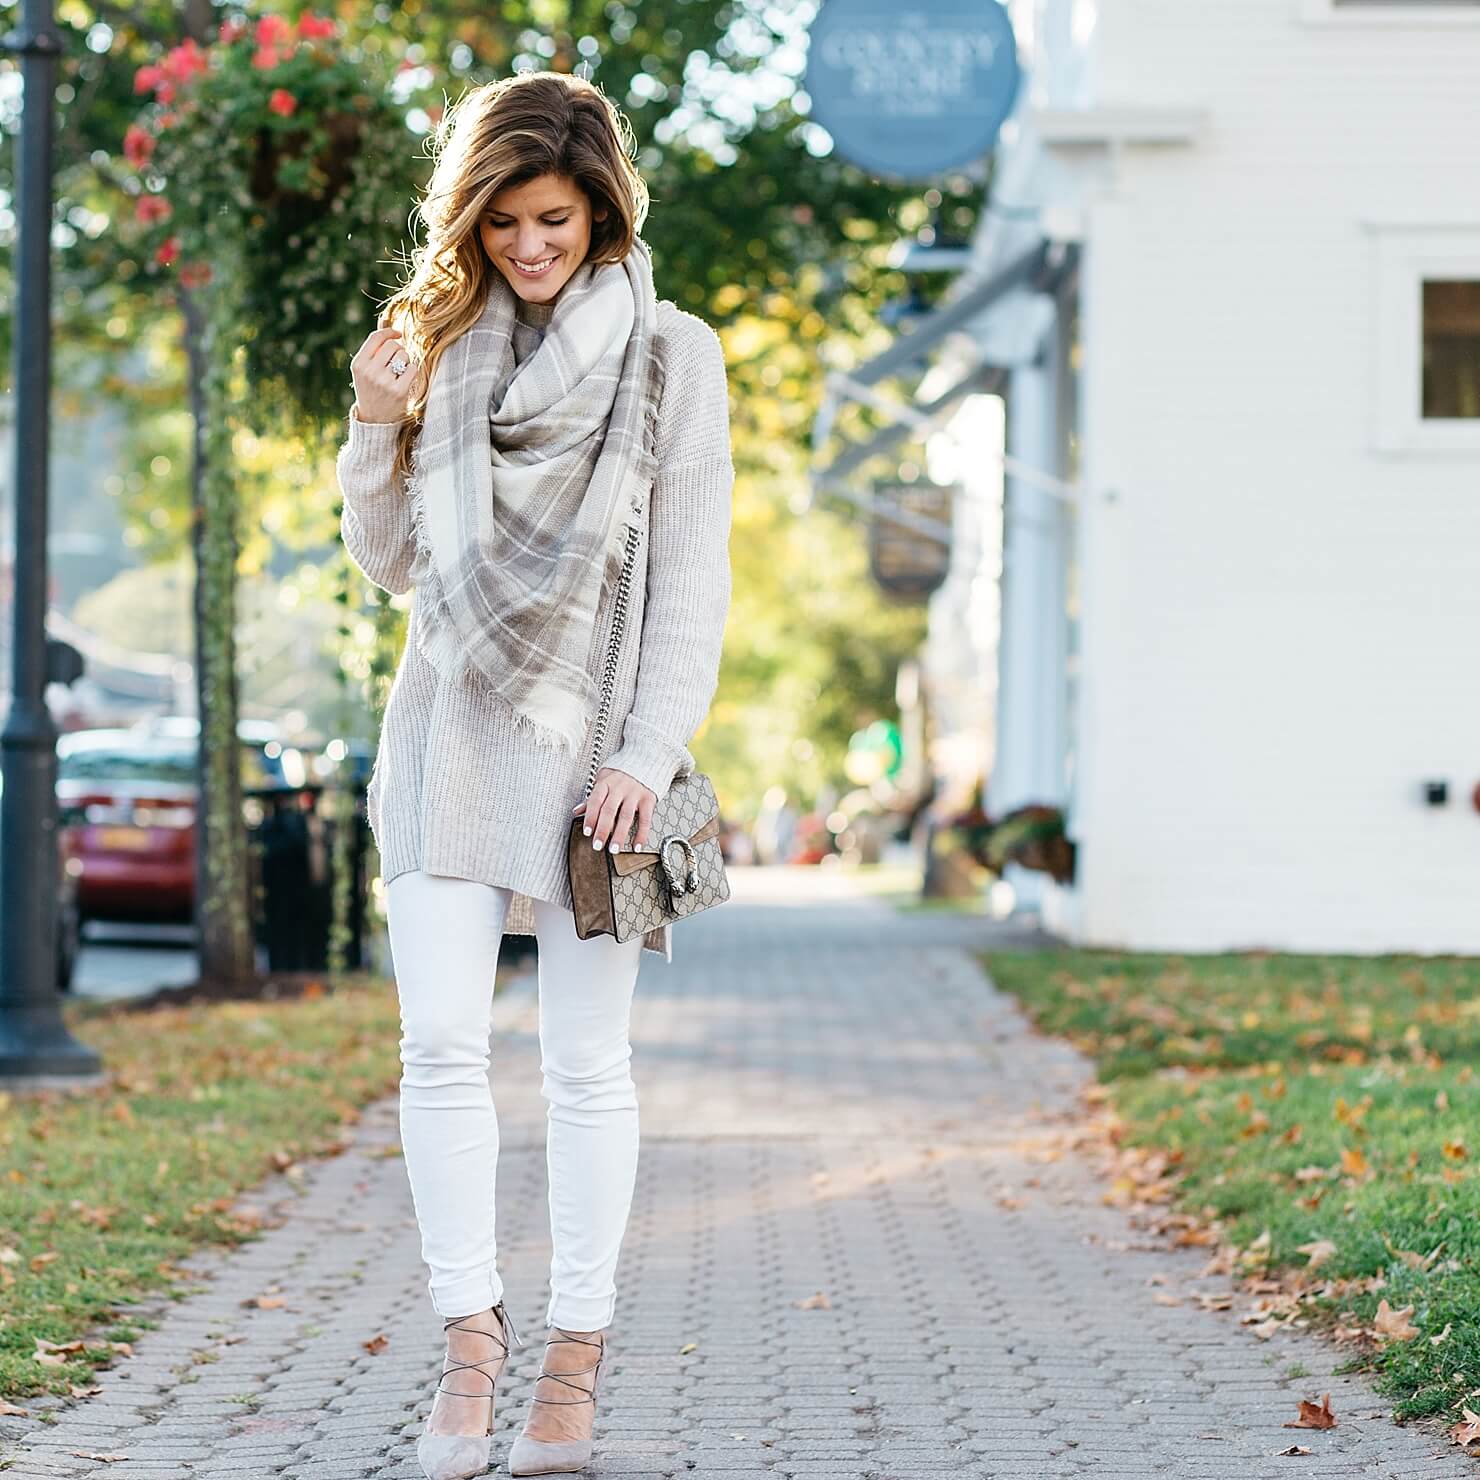 oatmeal neutral tunic sweater, sam edelman lace up heels, gucci crossbody, plaid scarf, neutral fall white jeans outfit